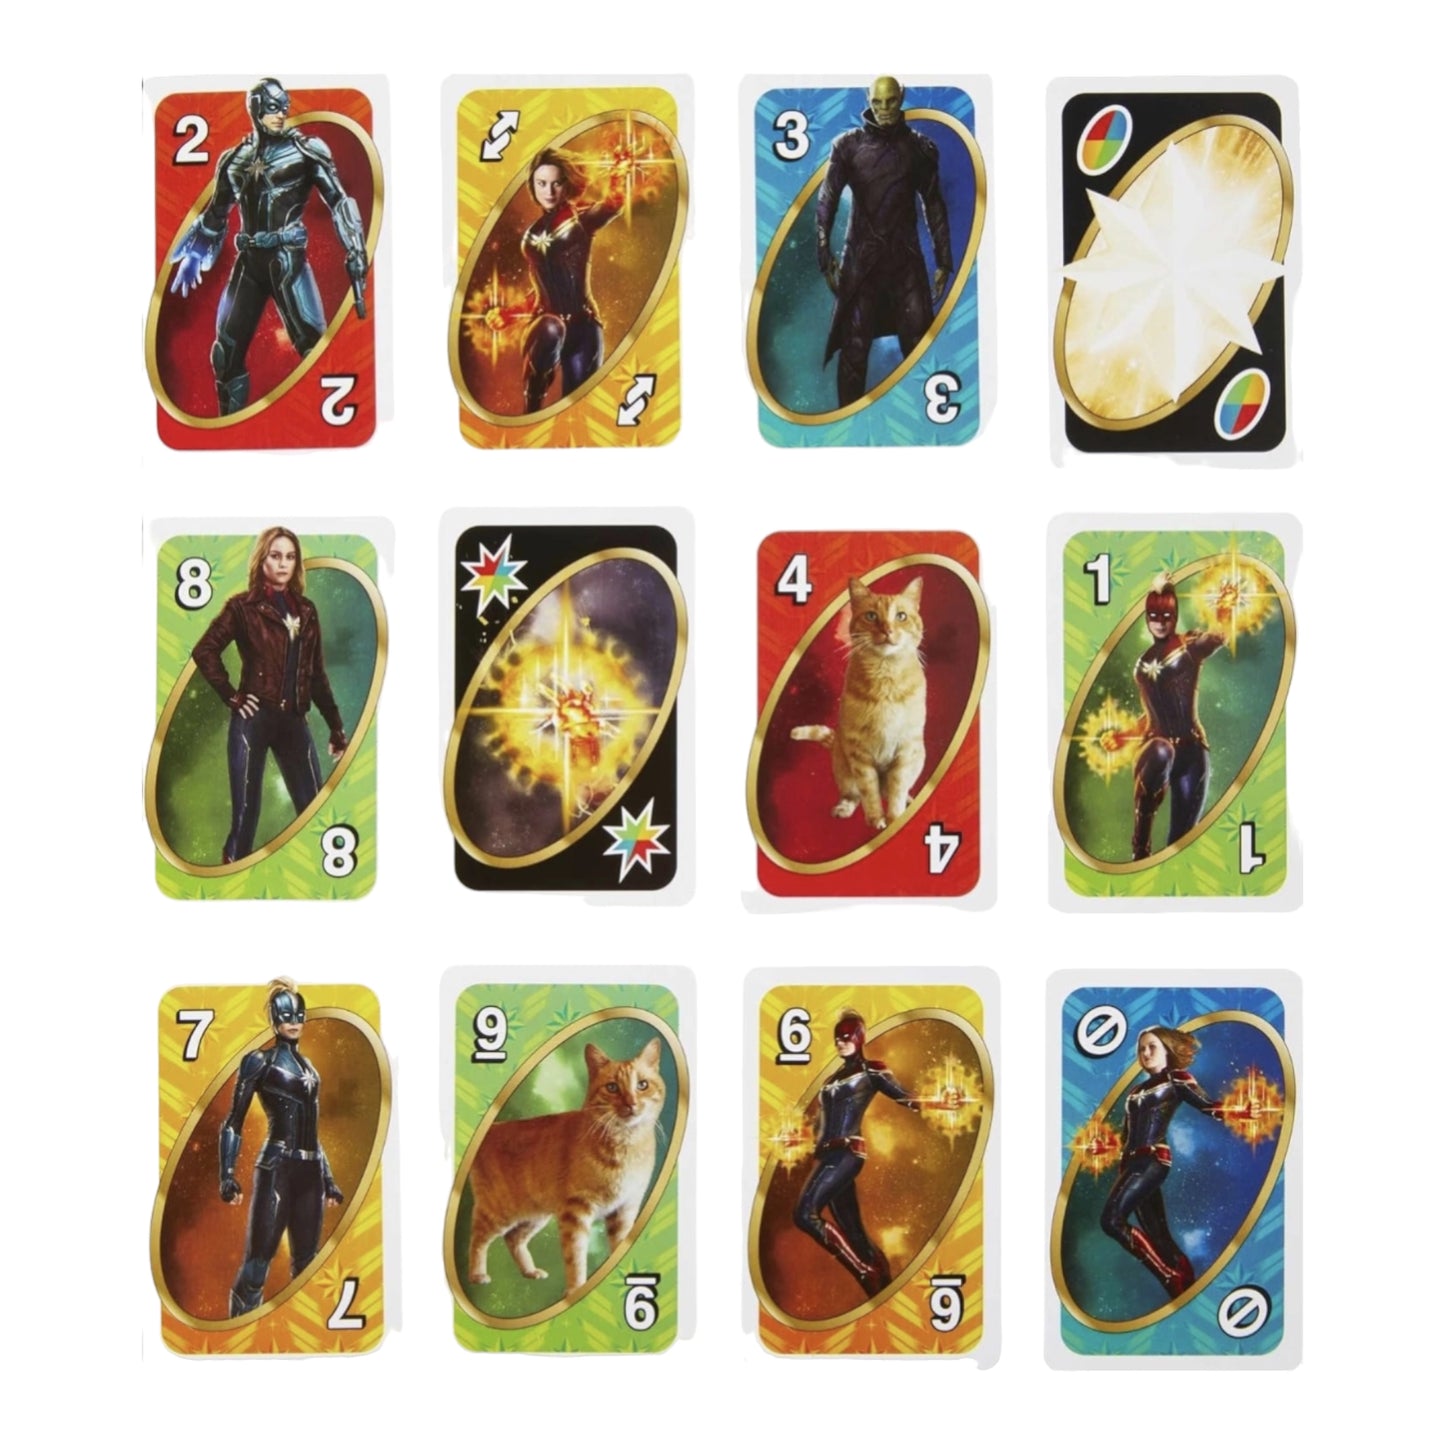 UNO card game - Avengers